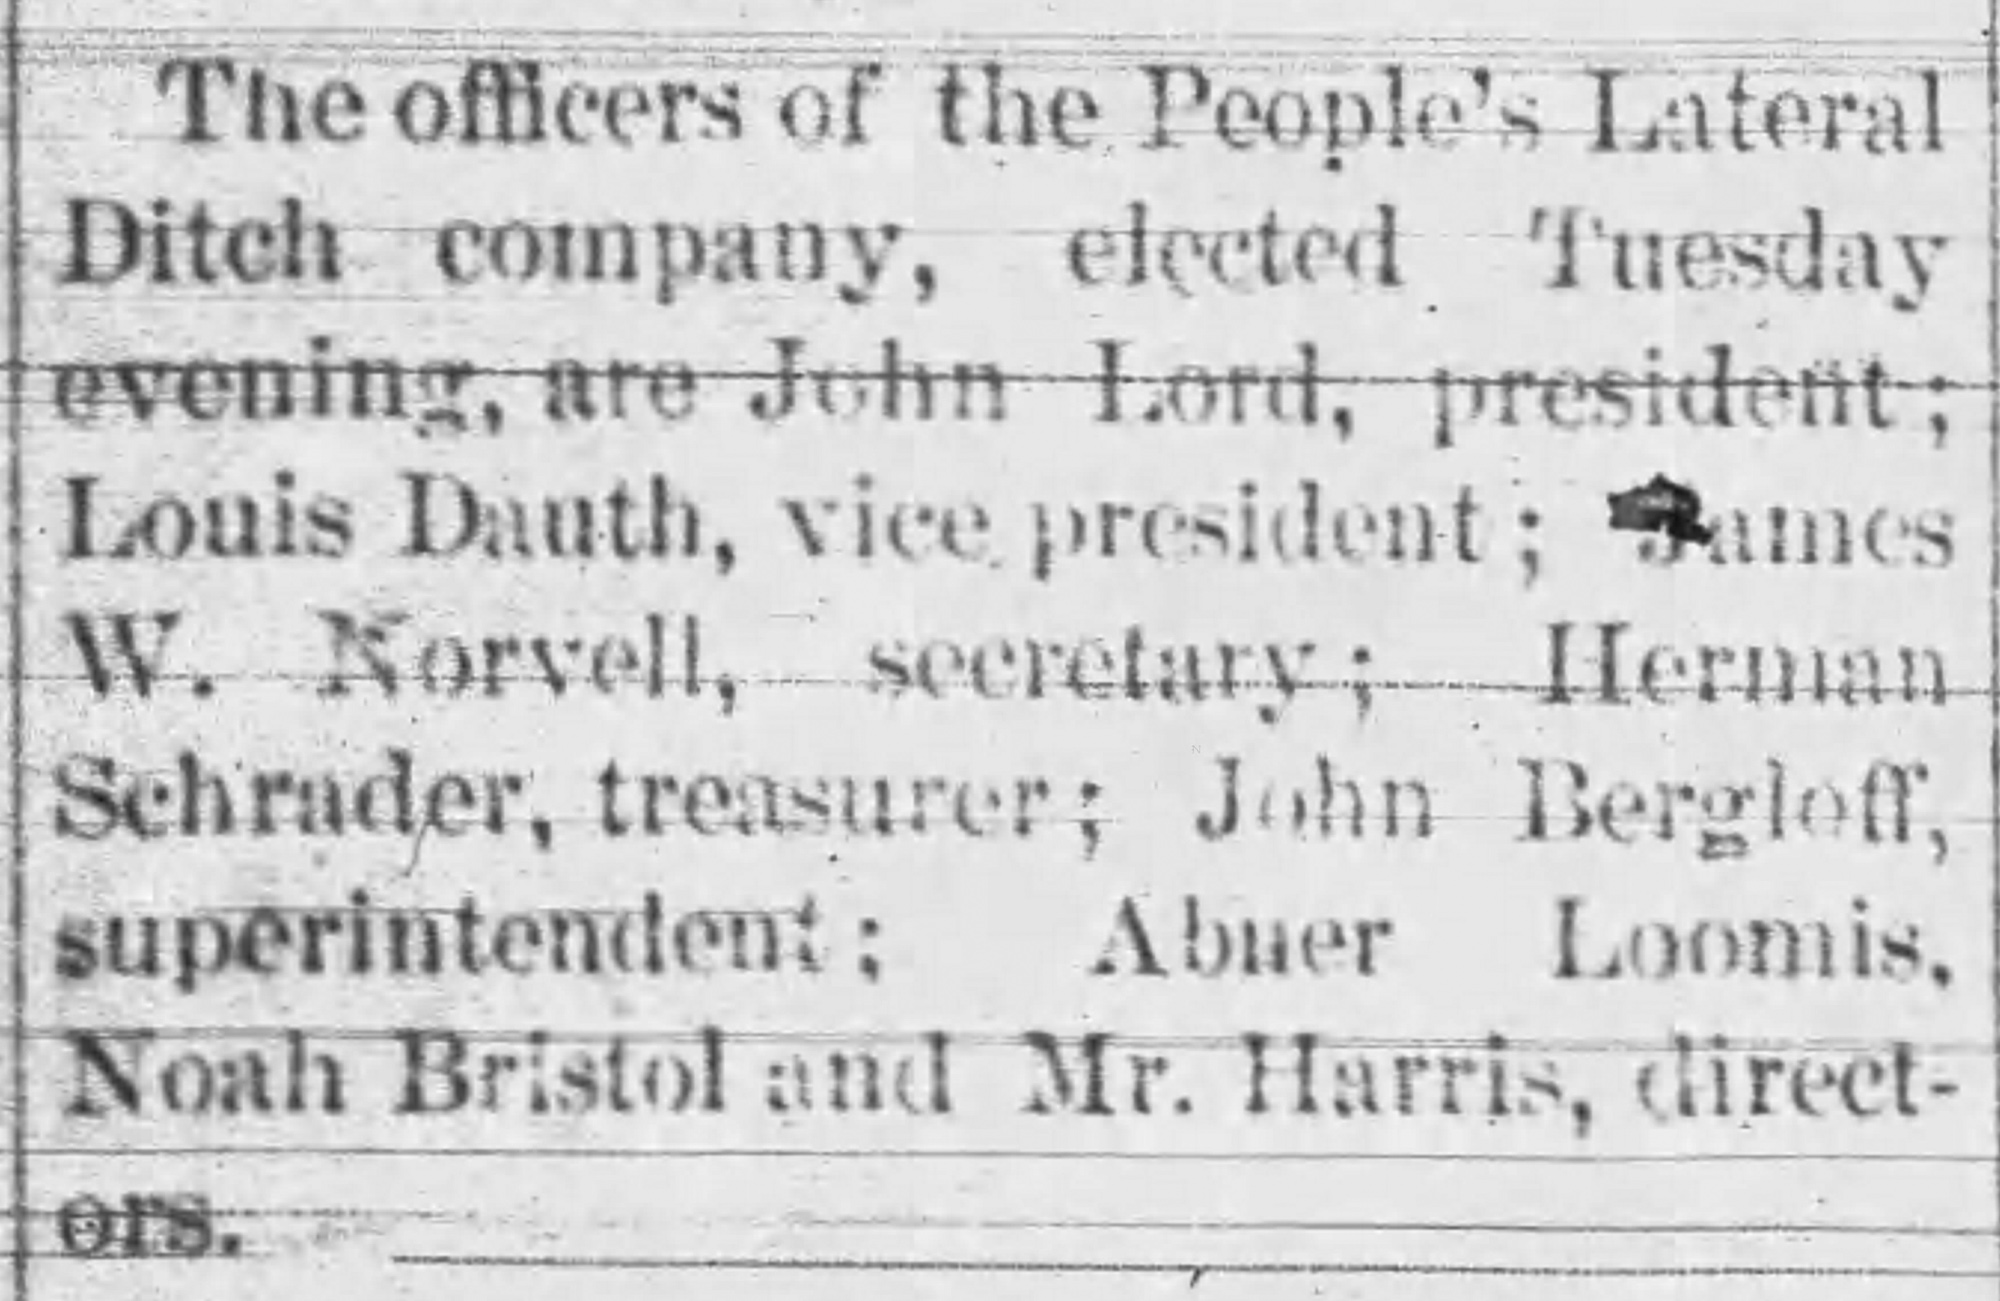 Dauth Family Archive - 1882-04-08 - The Daily Express - Louis Dauth Vice President of Peoples Lateral Ditch Company